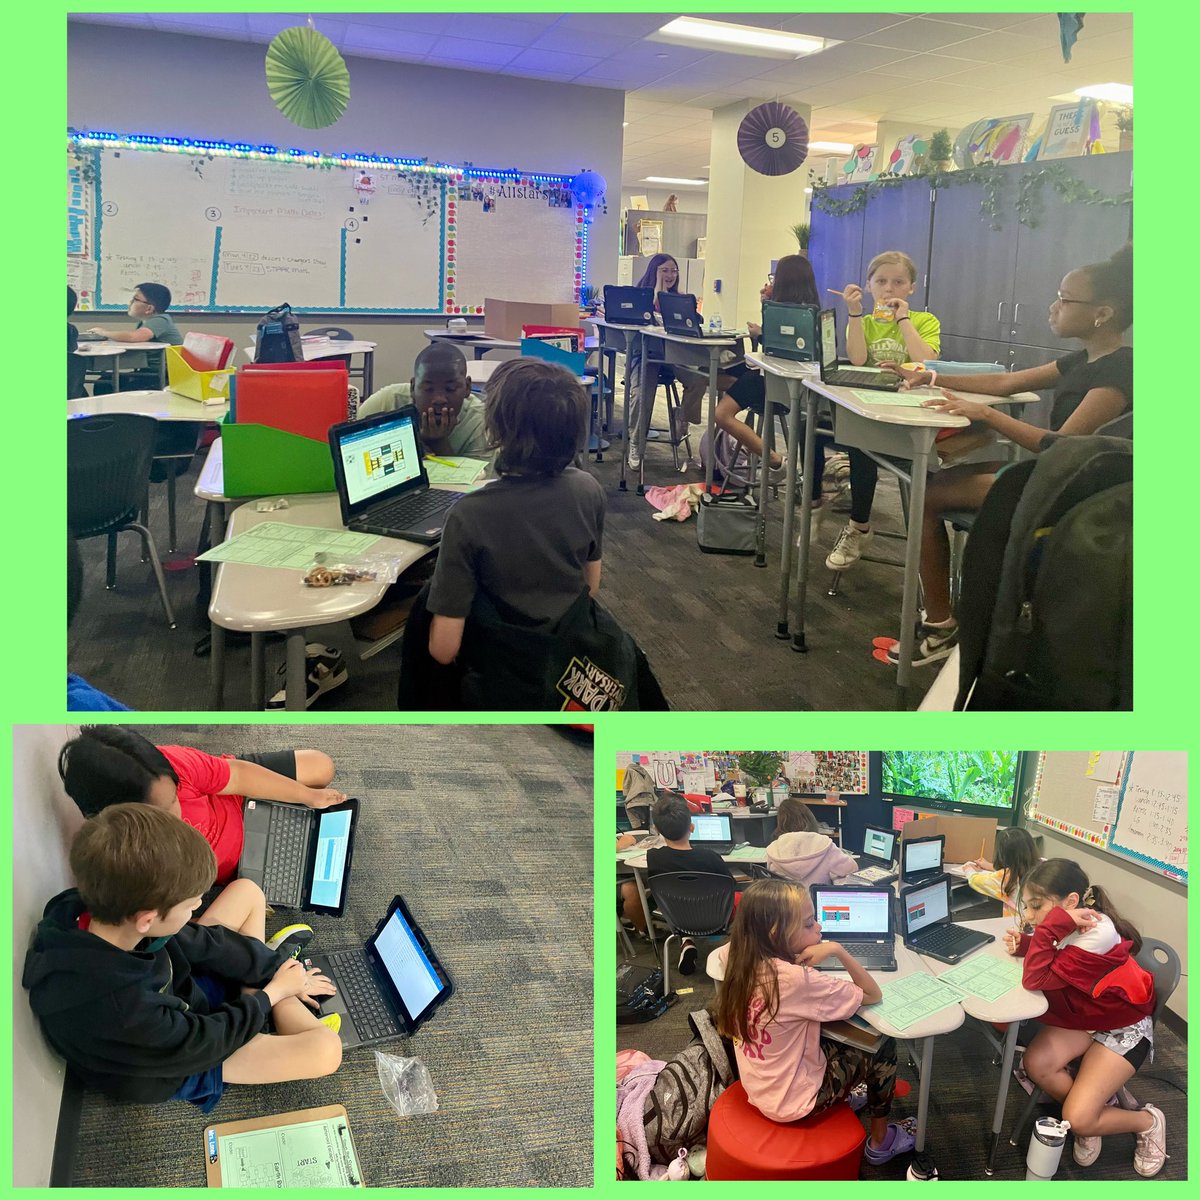 ✖️➗Wrapping up our @AultElem Boot Camp in the Jungle STAAR review!  🪖Over the 3 days, S did exercises, ate trail mix & popcorn, & worked on reviewing all the math!  So excited for them to show off their skills tomorrow! 🍃#TeamAult #ELEVATE